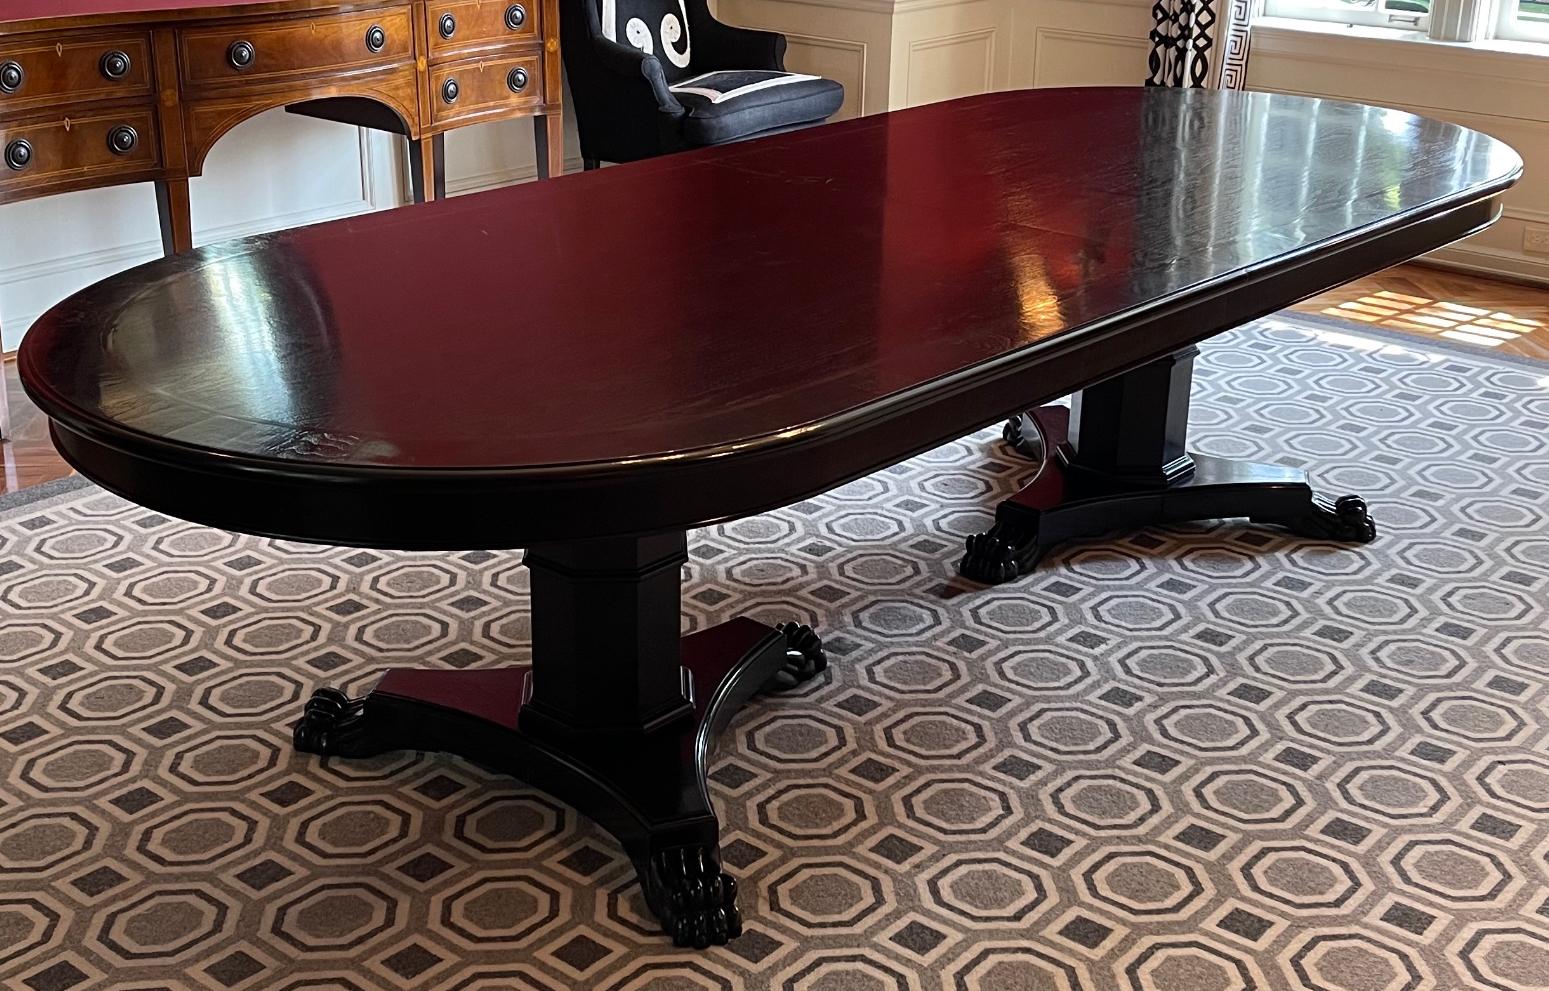 Mary McDonald Interiors 10’ Double Pedestal Regency Style Dining Table. This is the actual table featured in Mary McDonald’s book as illustrated in the pics.  It features an ebony finish with an inlaid rouge stripe and double pedestal base with paw